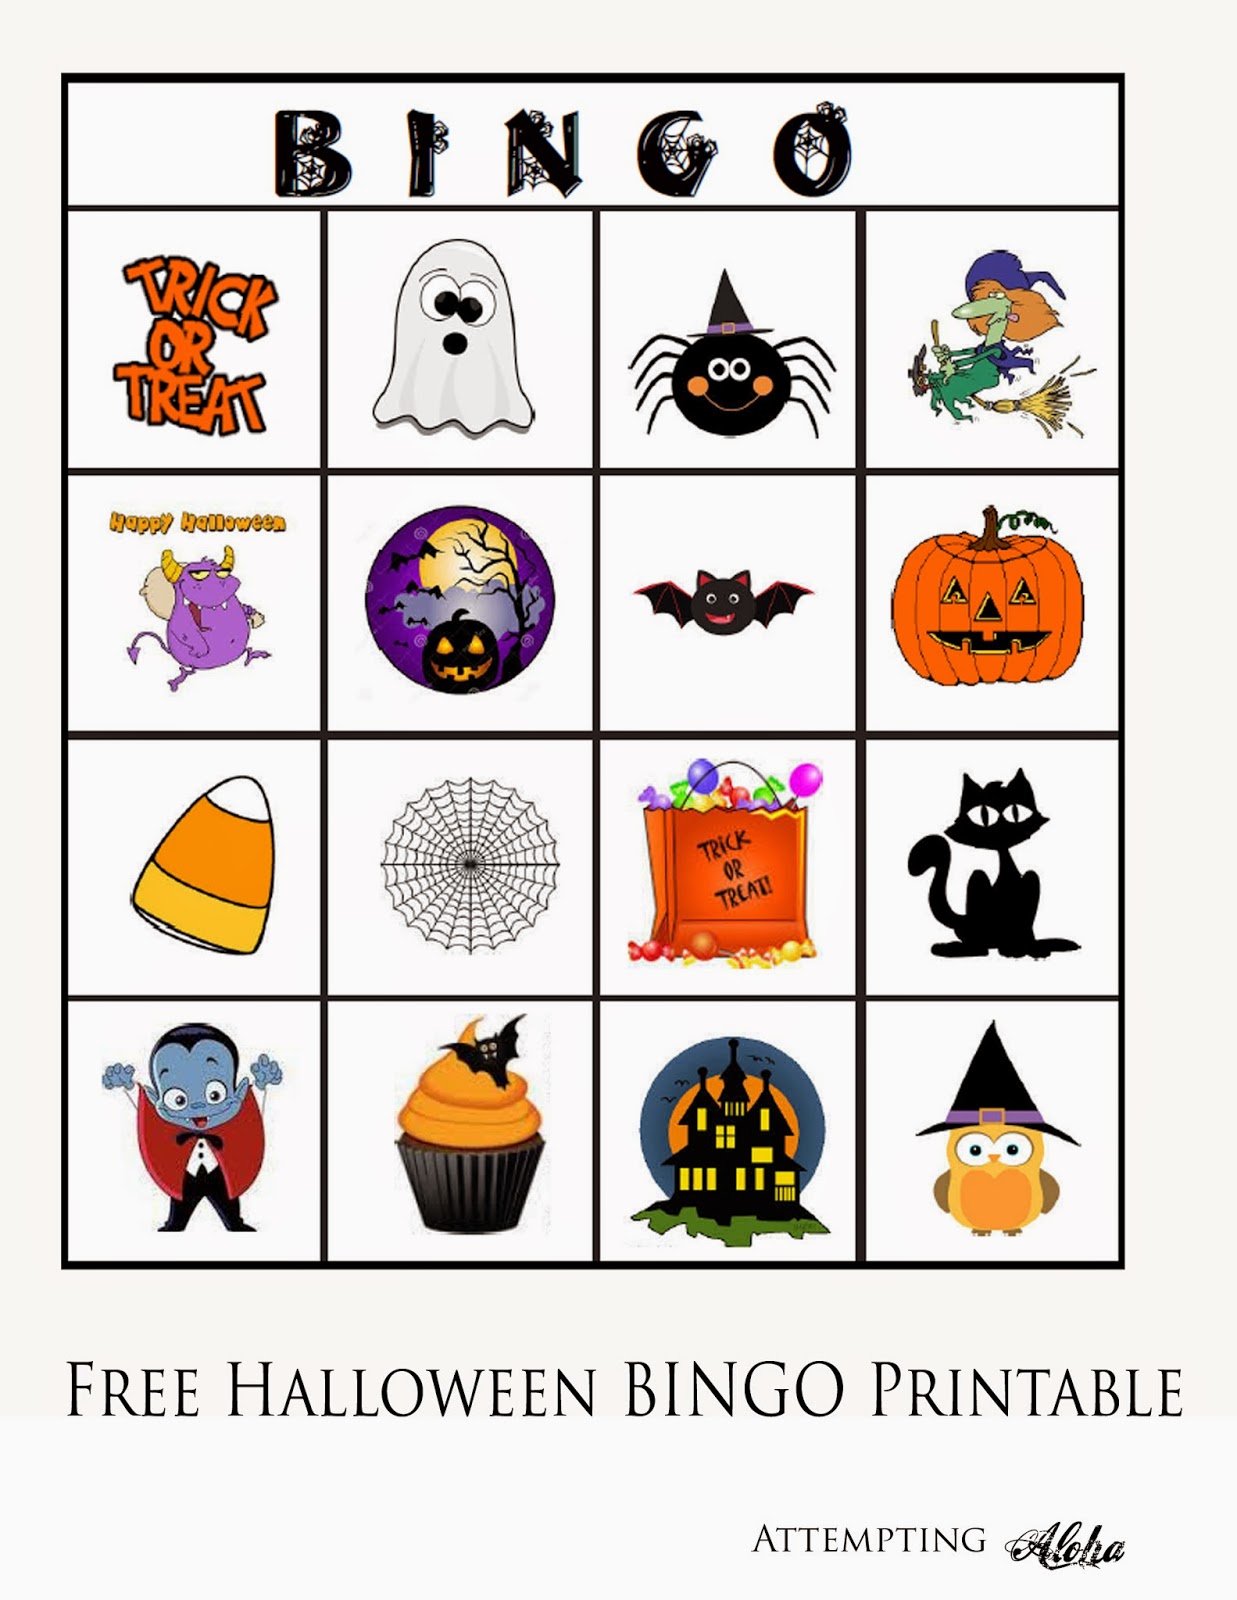 halloween-bingo-free-printable-with-pictures-4-players-busy-little